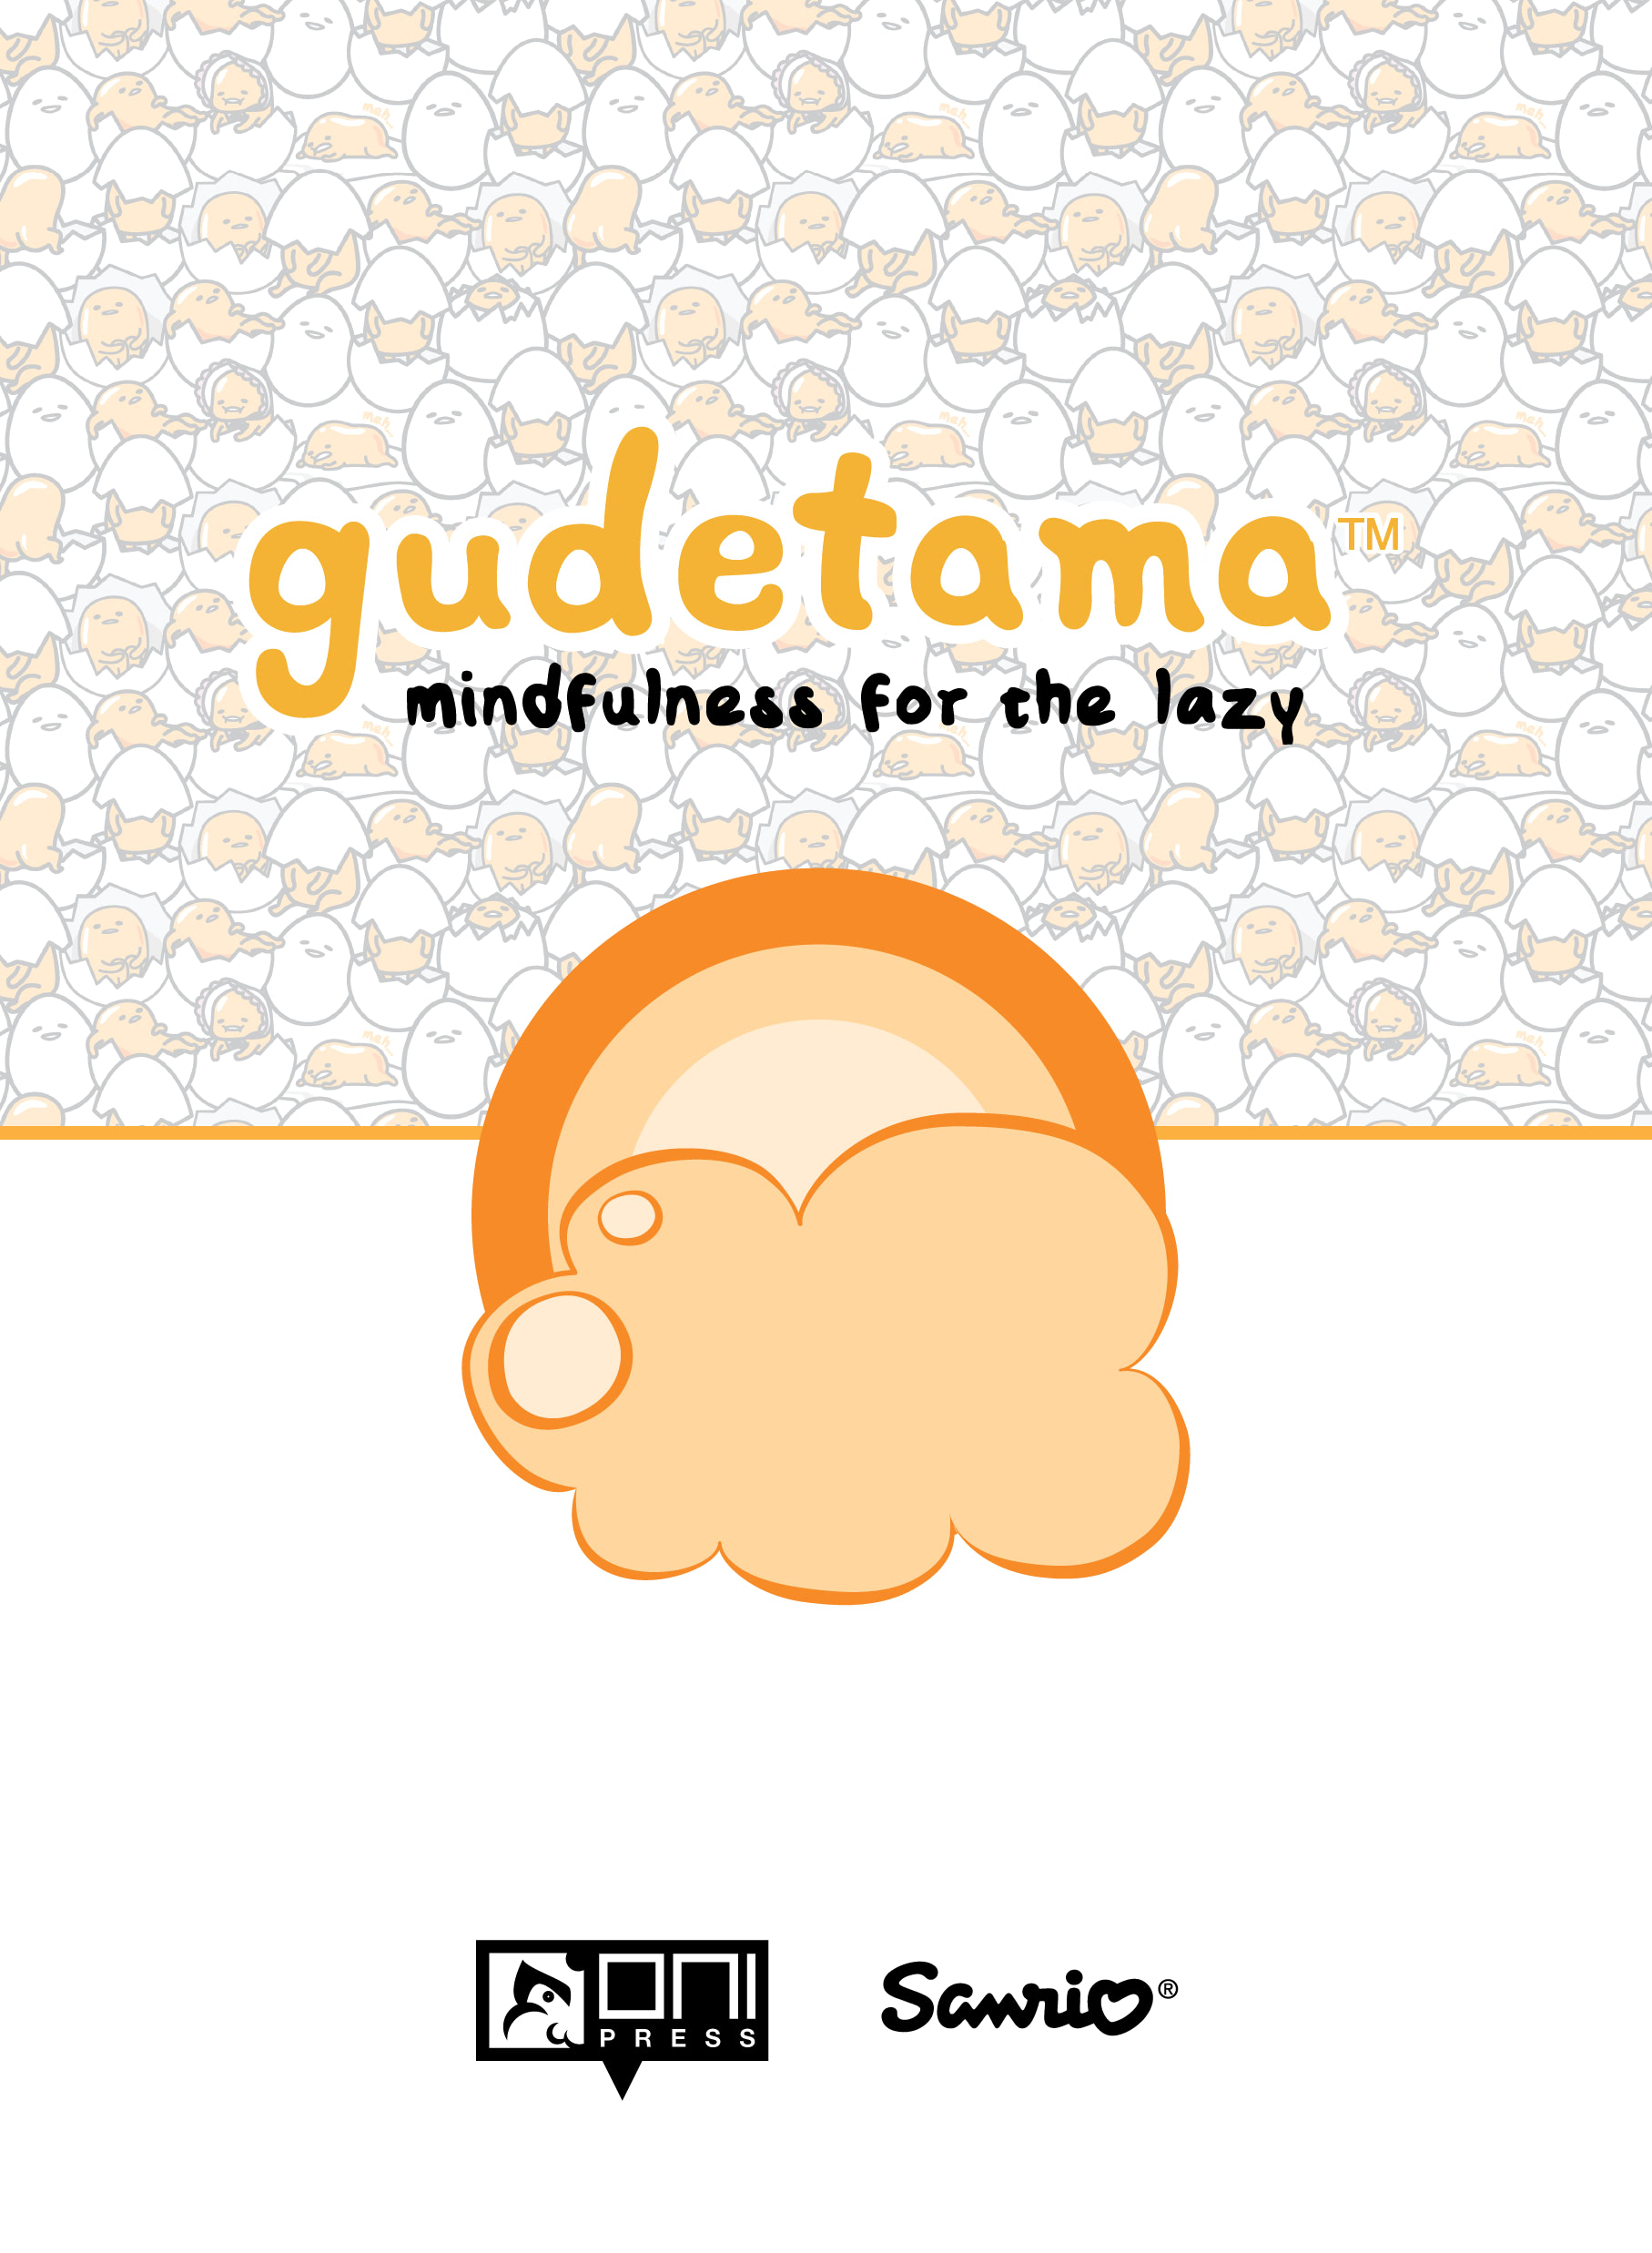 Read online Gudetama comic -  Issue # Mindfulness for the Lazy - 4